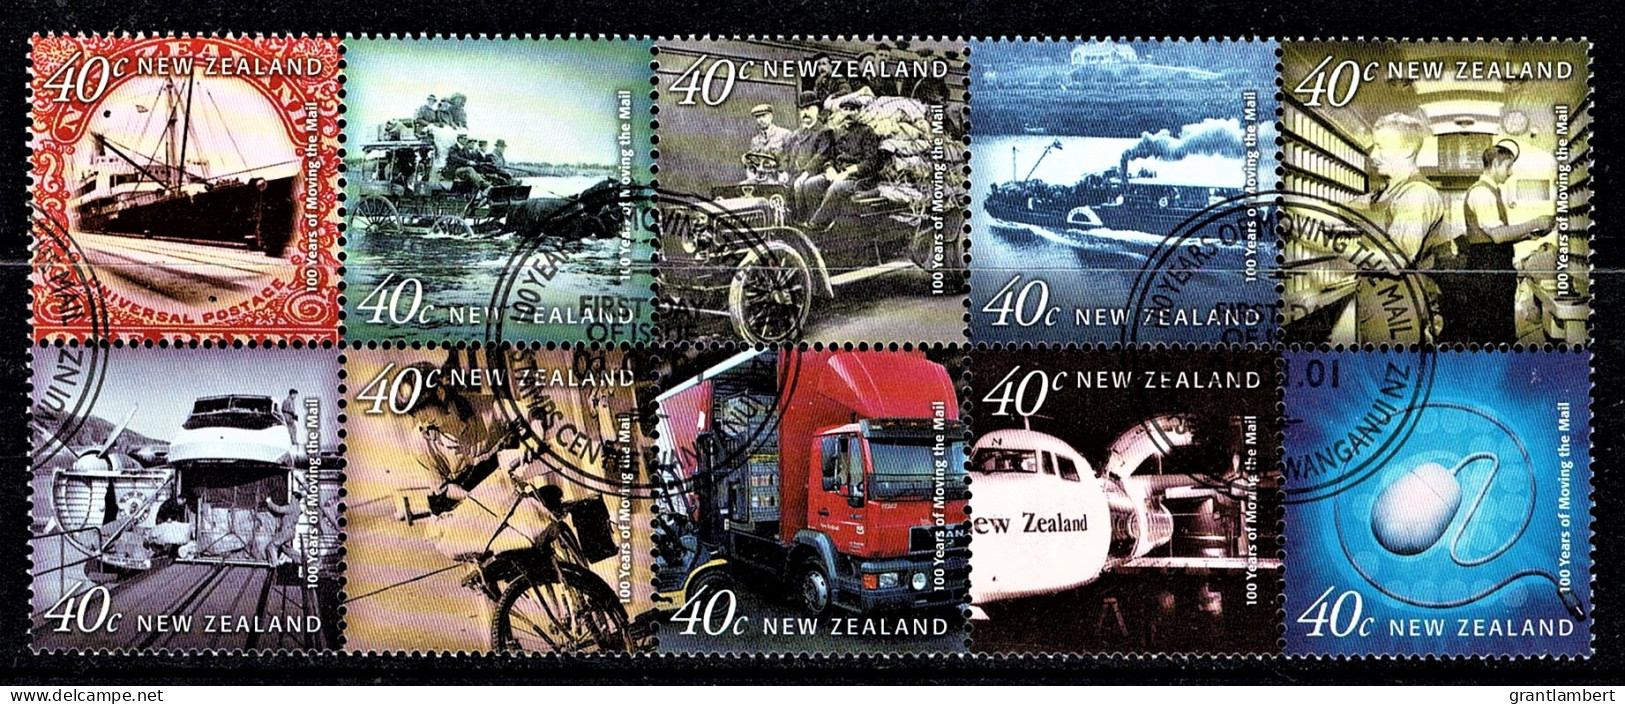 New Zealand 2001 Moving The Mail Set As Block Of 10 Used - Used Stamps